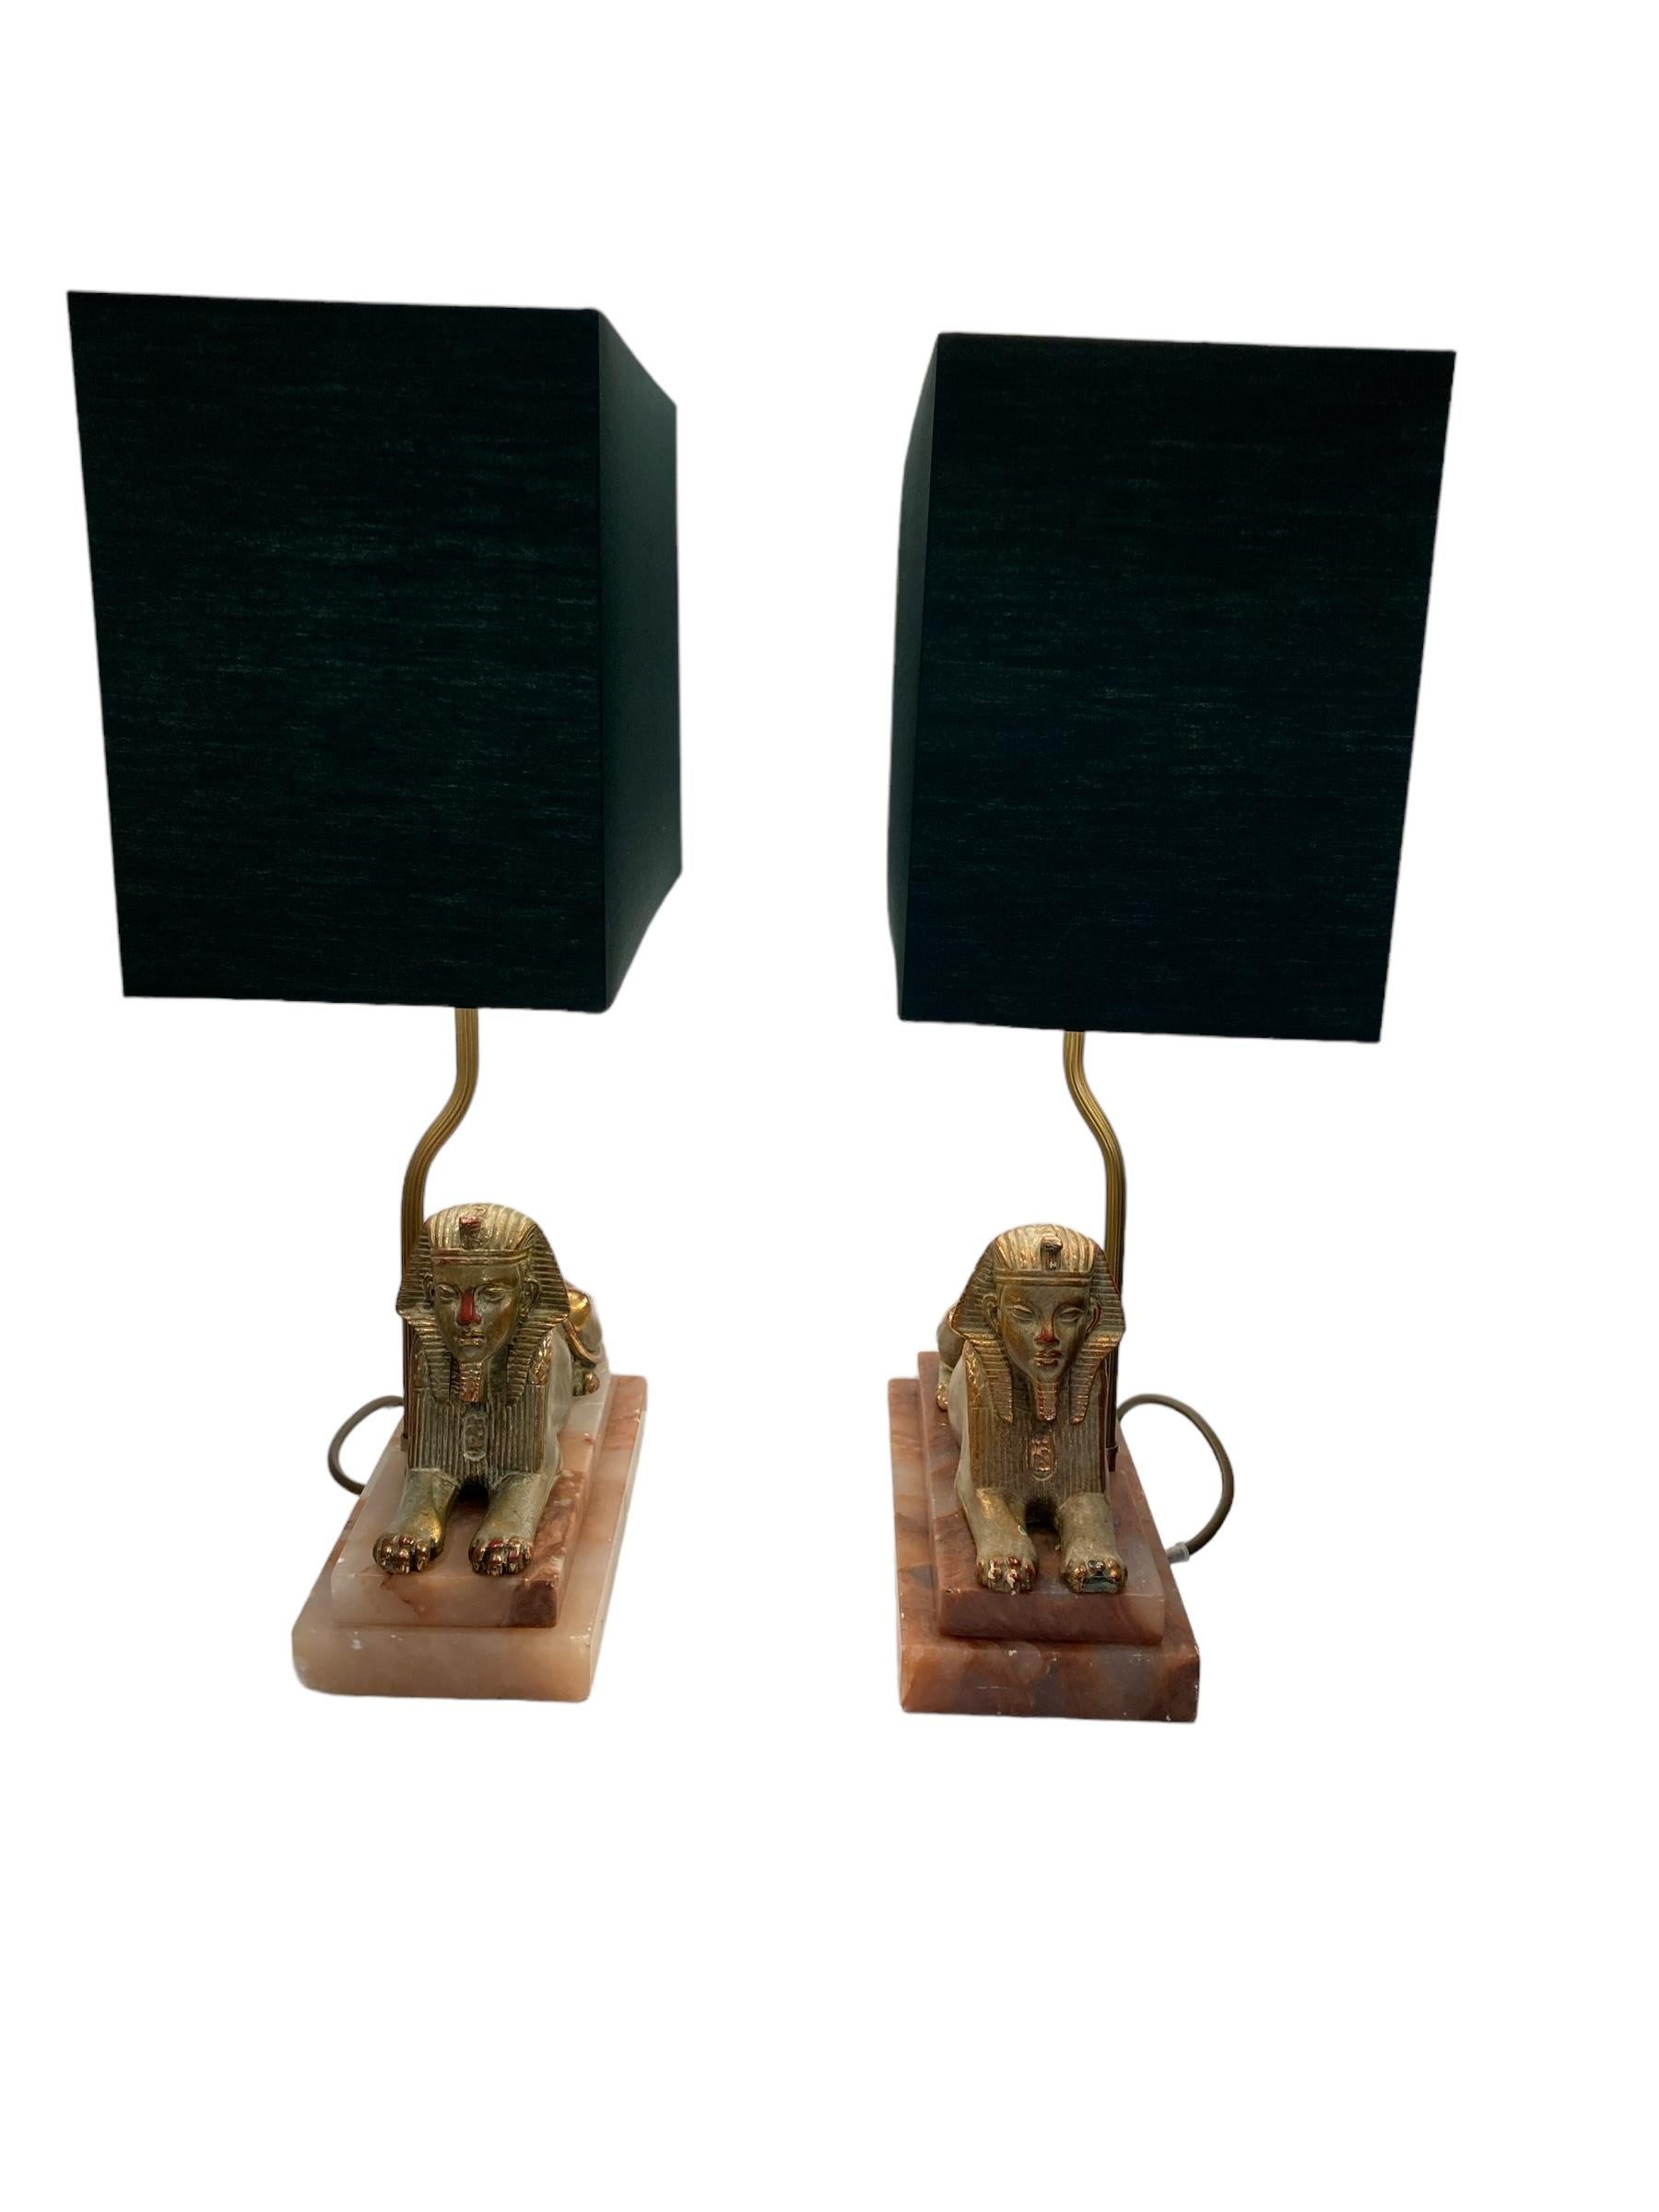 Spelter A Pair of Art Deco Egytian Sphinx Table Lamps on a Marble Base Dark Green Shades For Sale